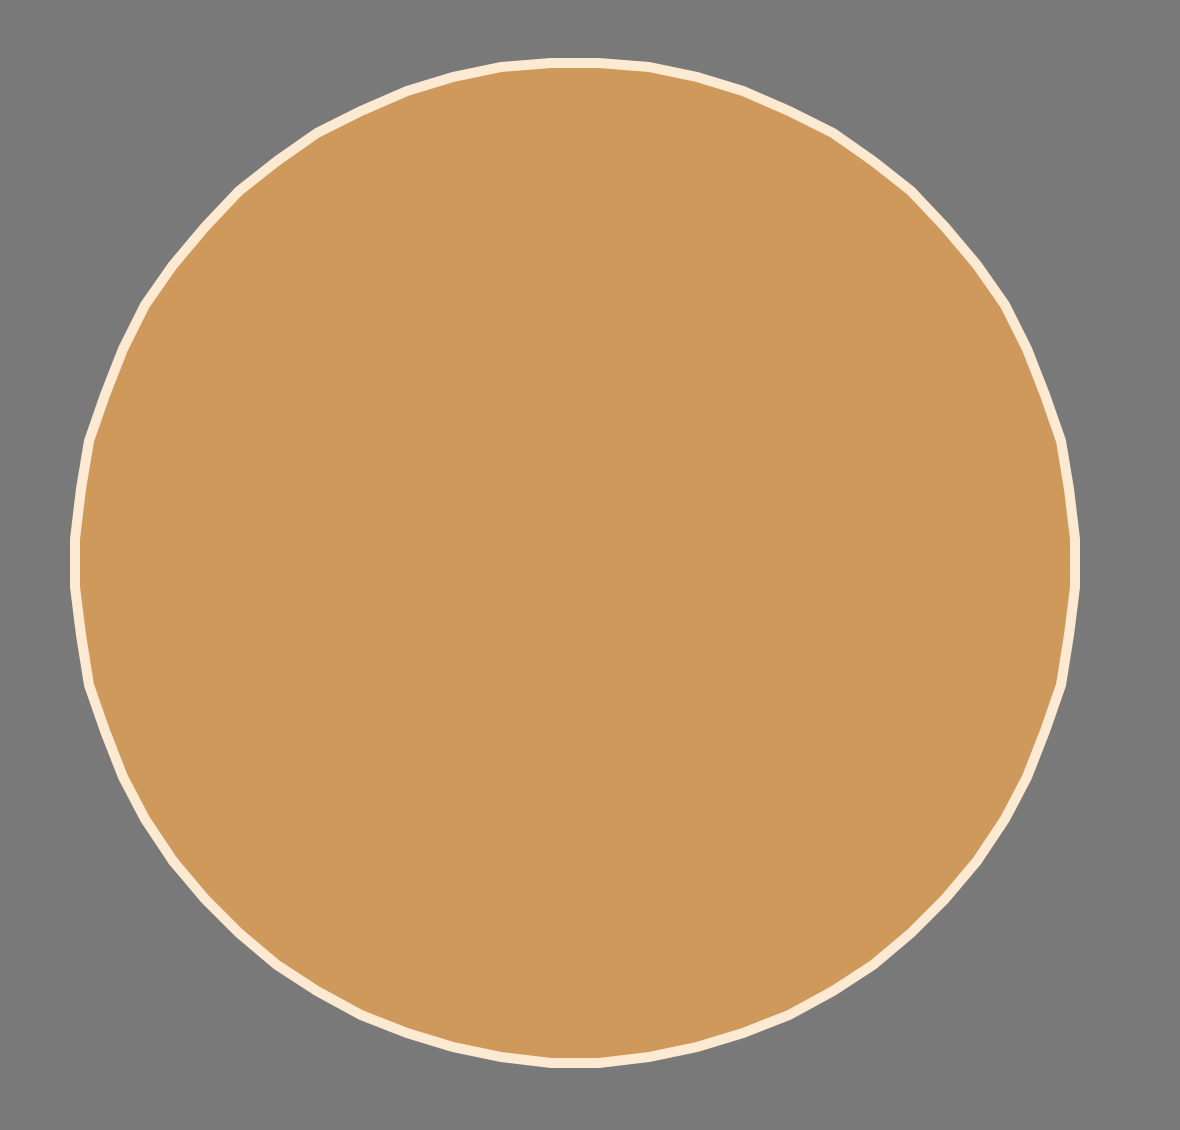 The start of the smiley face: a brown circle with a lighter tan edge, on a gray background.